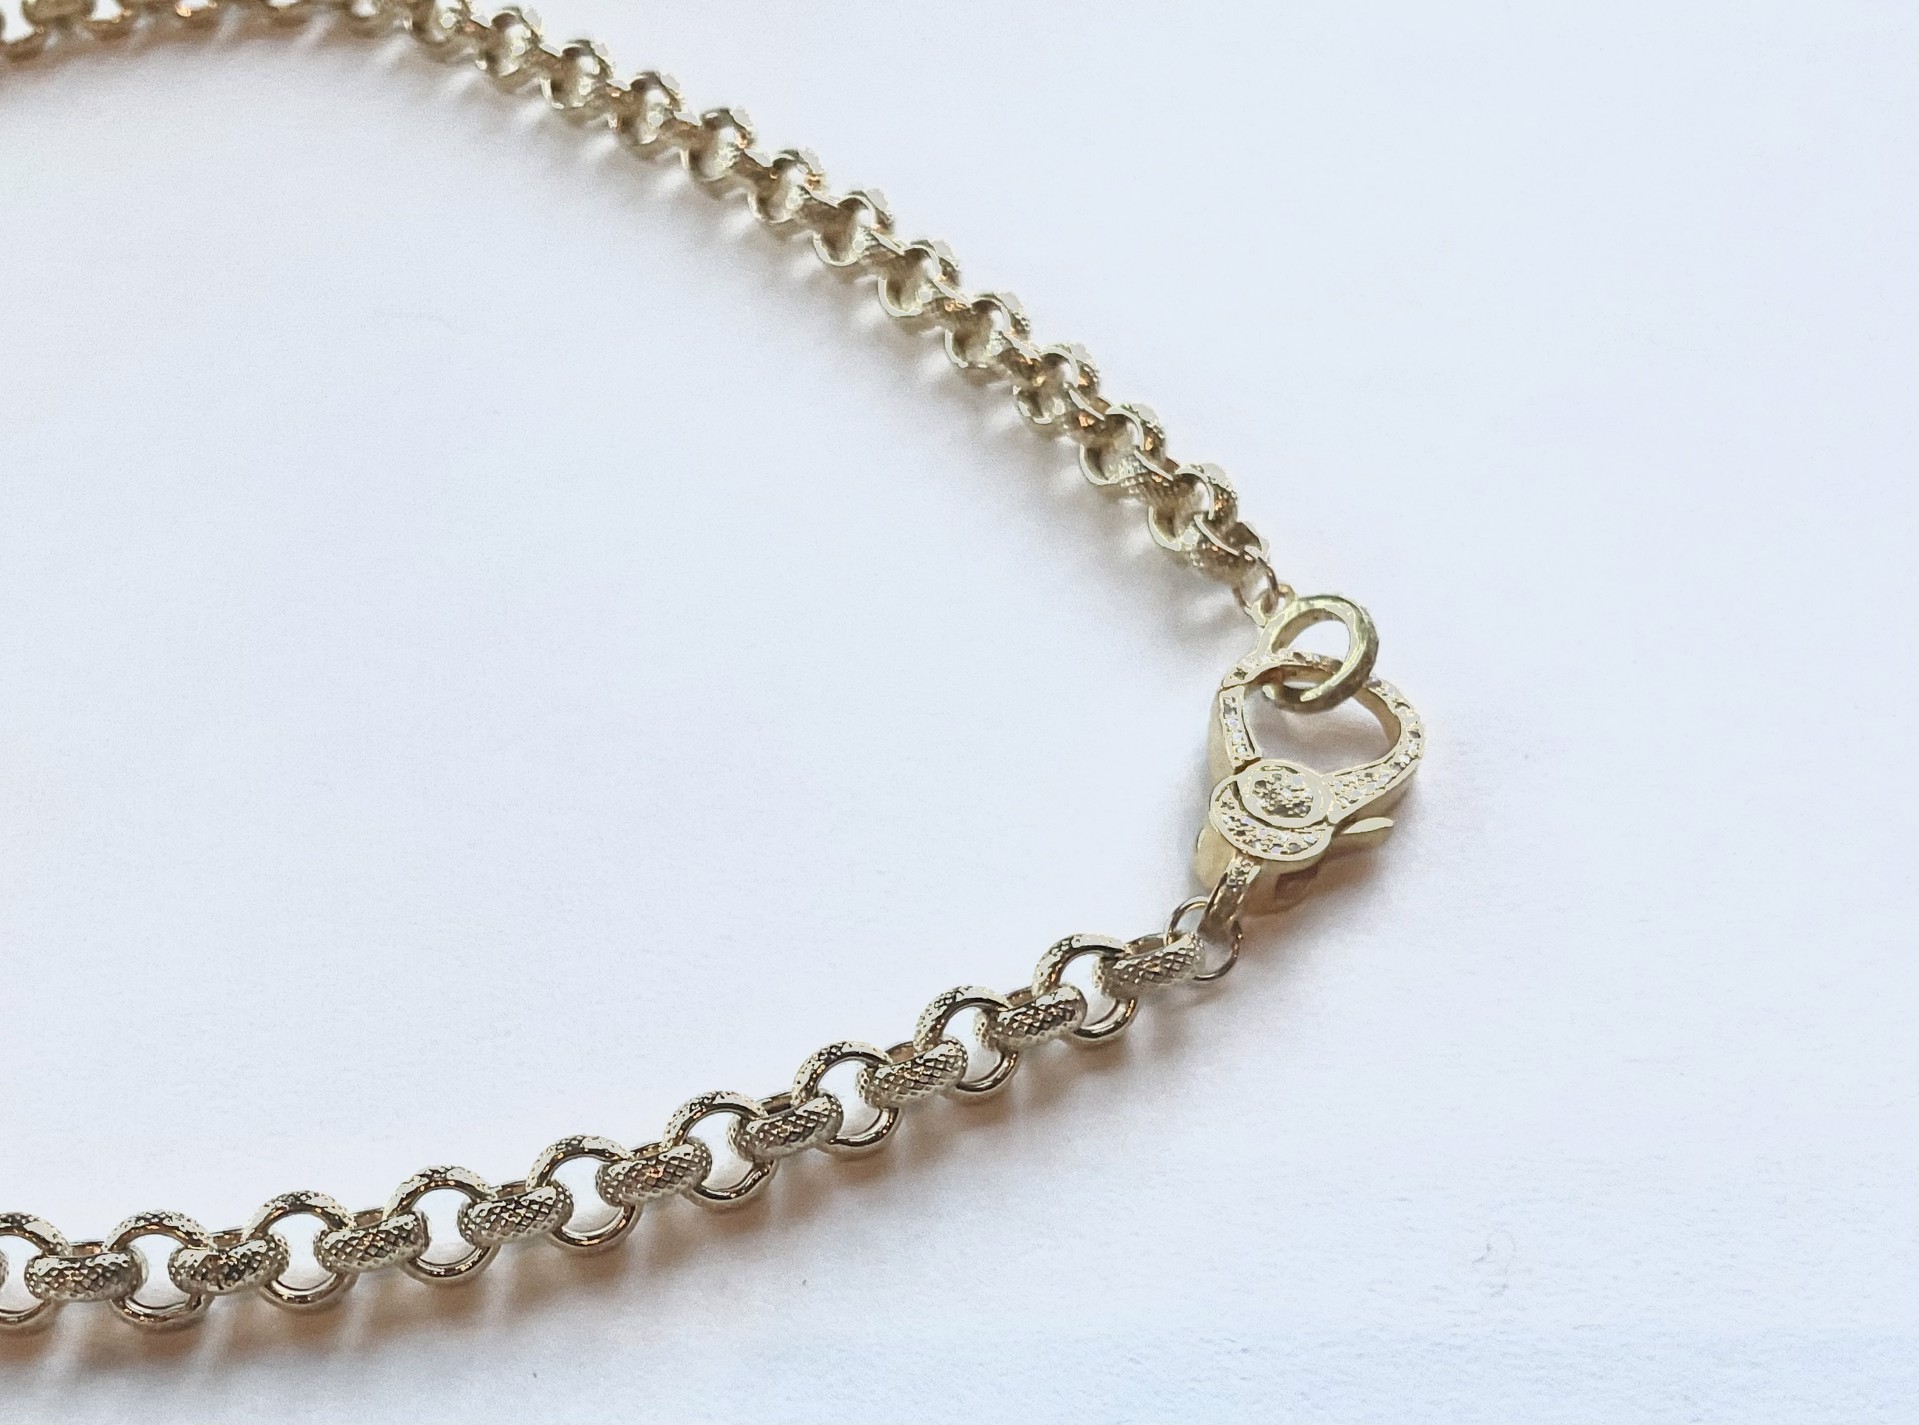 KB-N76 GVML Rolo Chain with Pave Diamond Clasp by Karen Birchmier